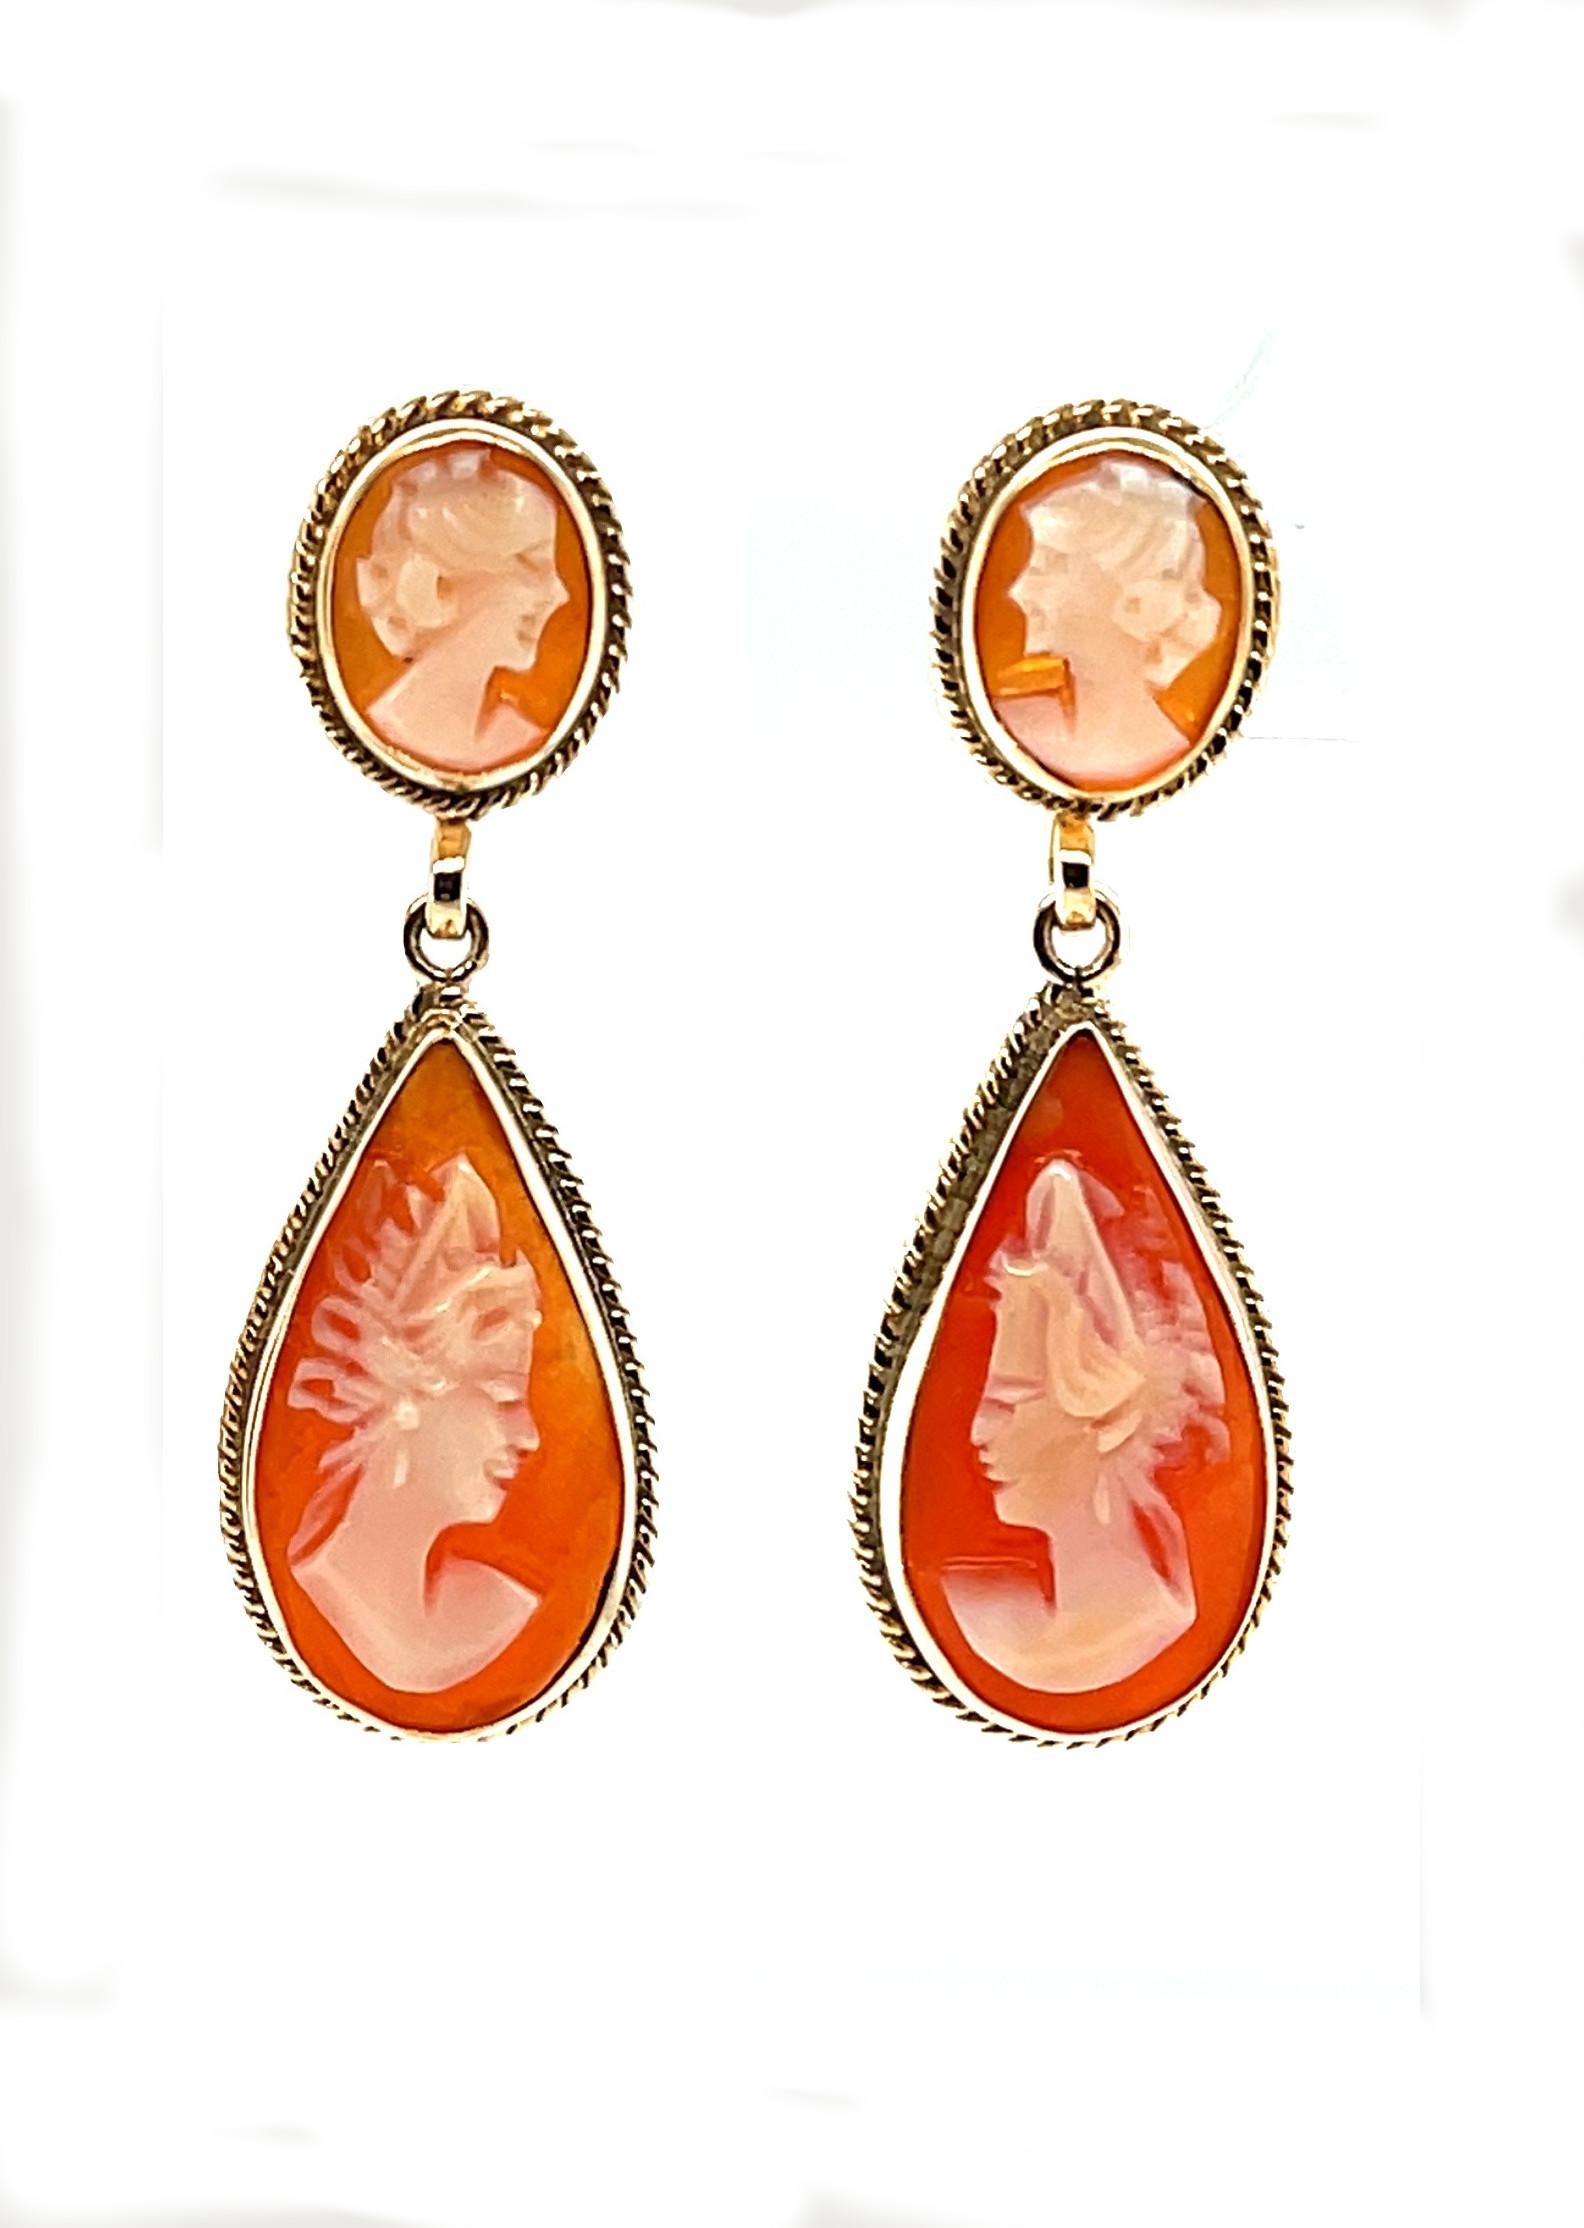 These beautiful drop earrings feature intricately carved Italian shell cameos. Each cameo is carved with a delicate and captivating profile showing elegance and individual personality. The cameos are bezel set in precious 14k yellow gold and